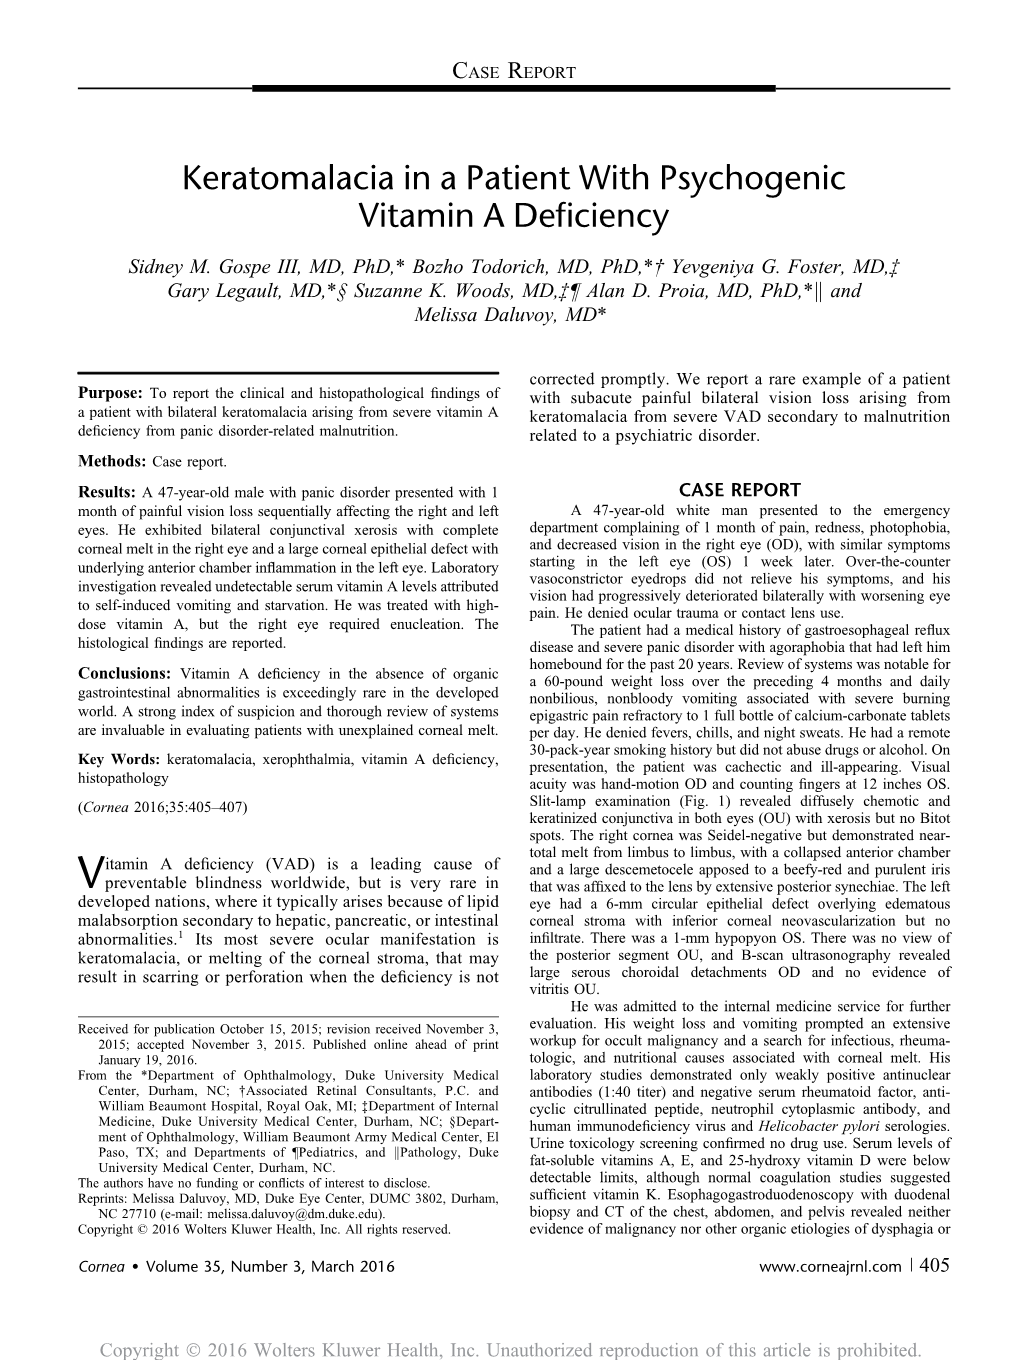 Keratomalacia in a Patient with Psychogenic Vitamin a Deficiency